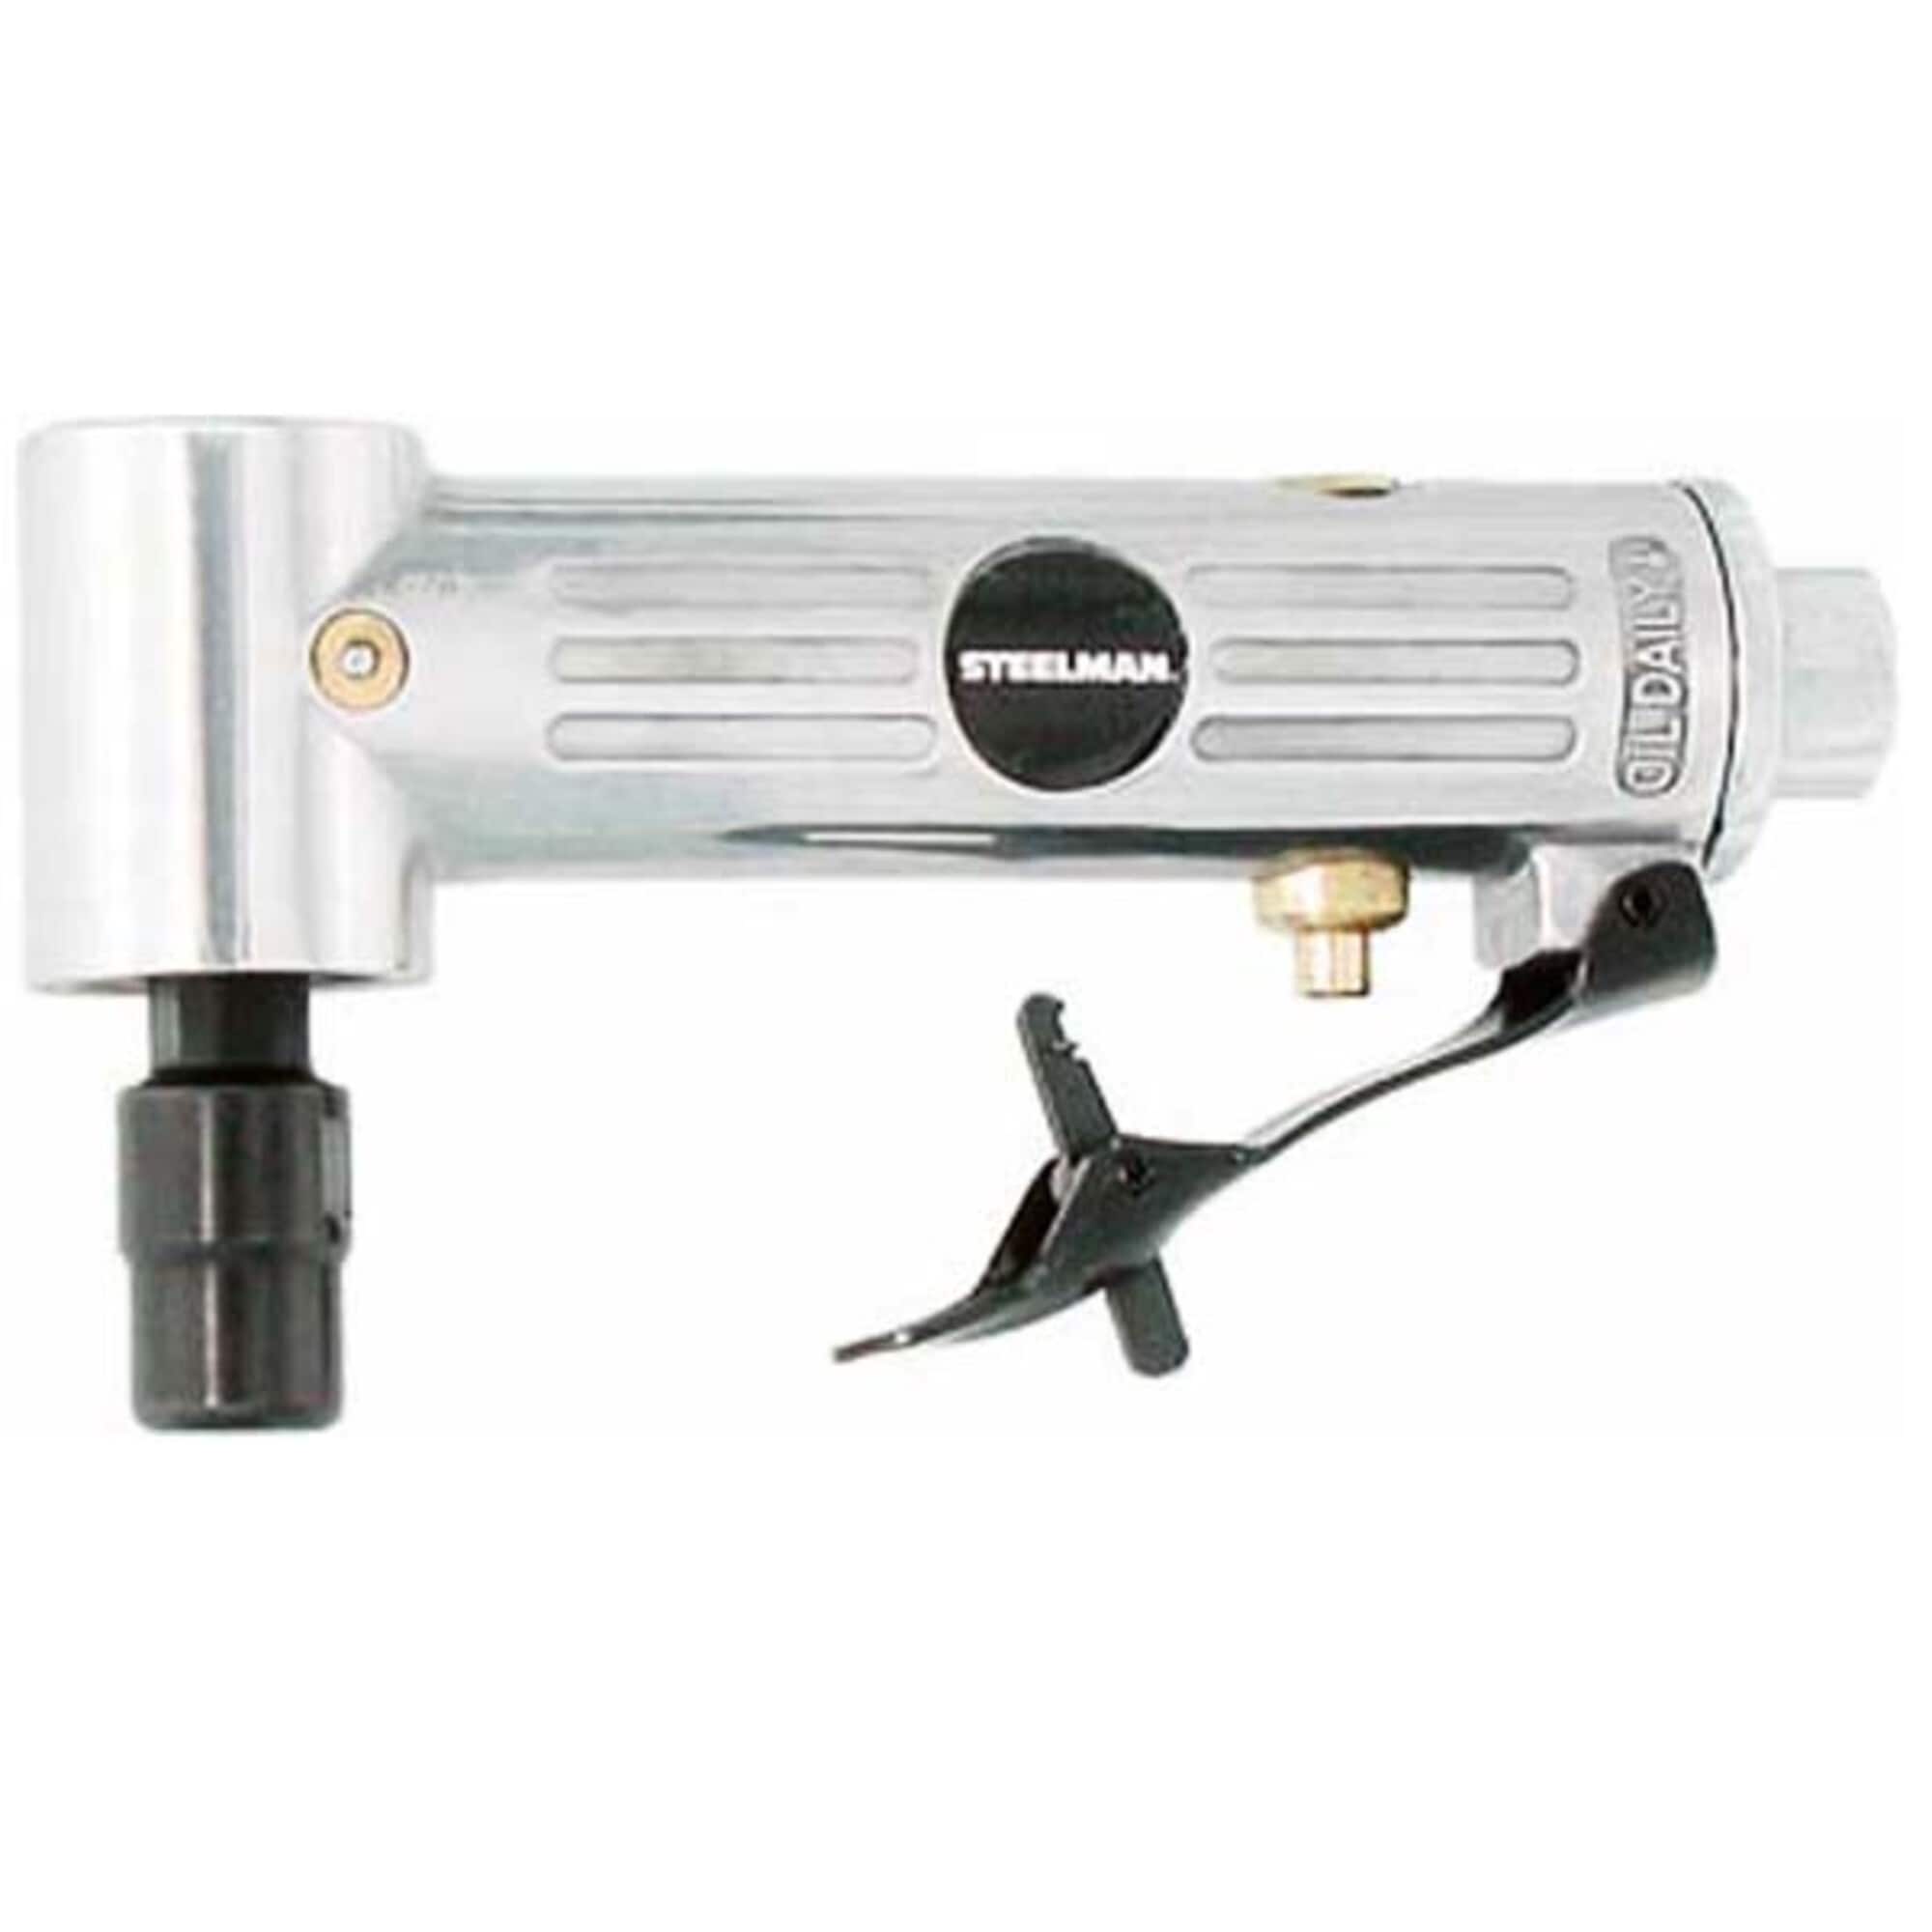 fanshao 1/4inch 90 Degree Angle Pneumatic Drill In-line Air